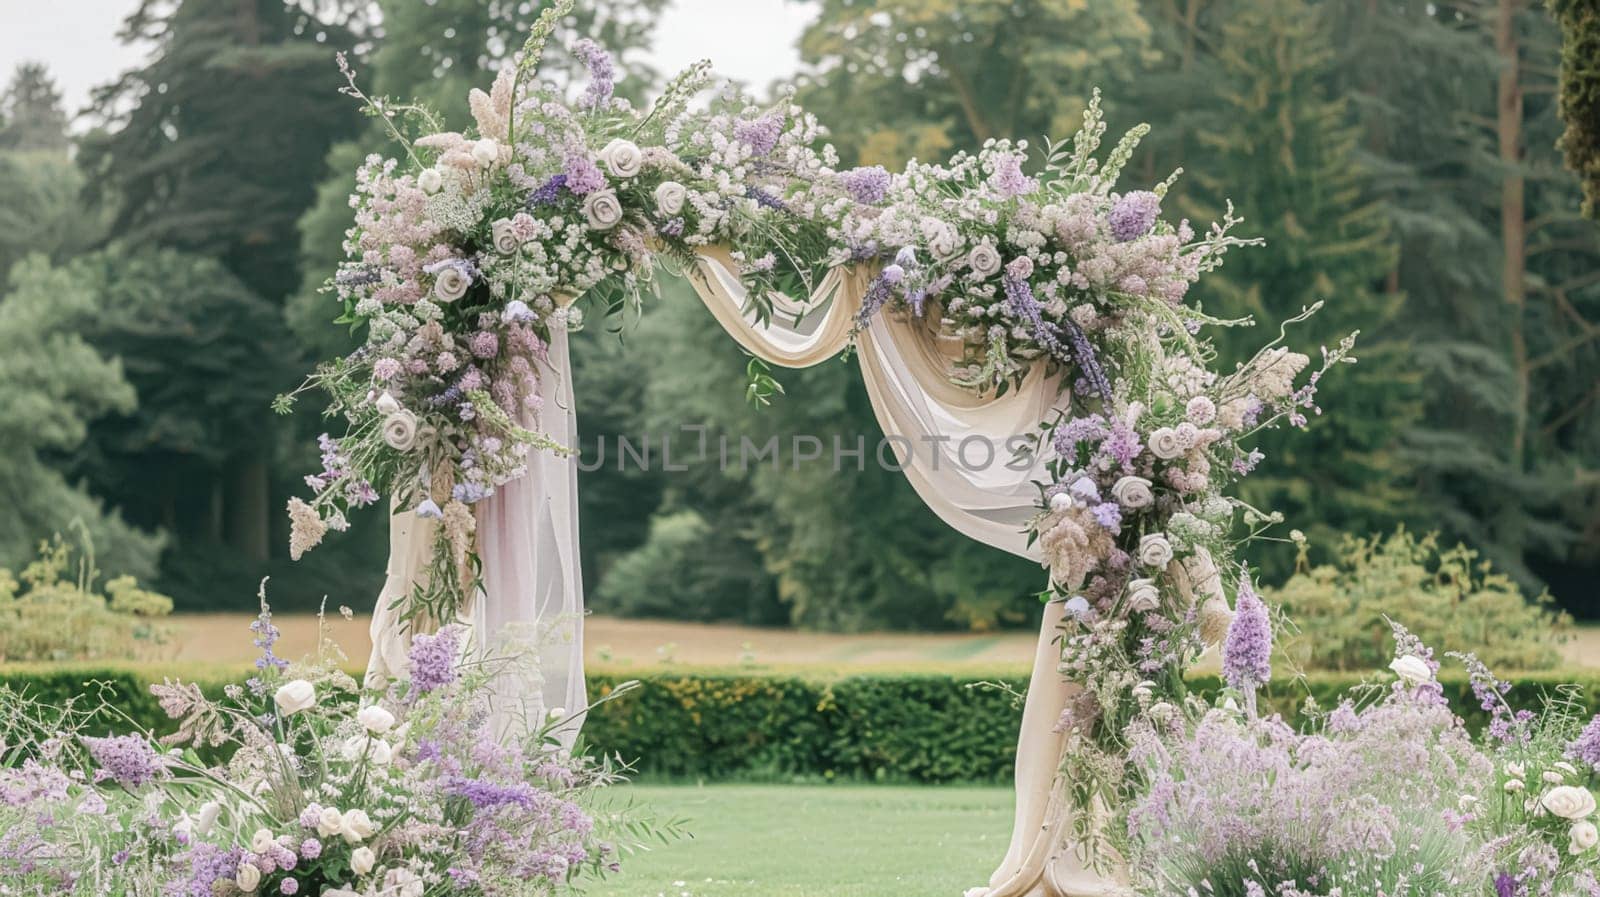 Wedding decor with lavender theme, floral decoration design and beautiful decor setting arrangement by Anneleven